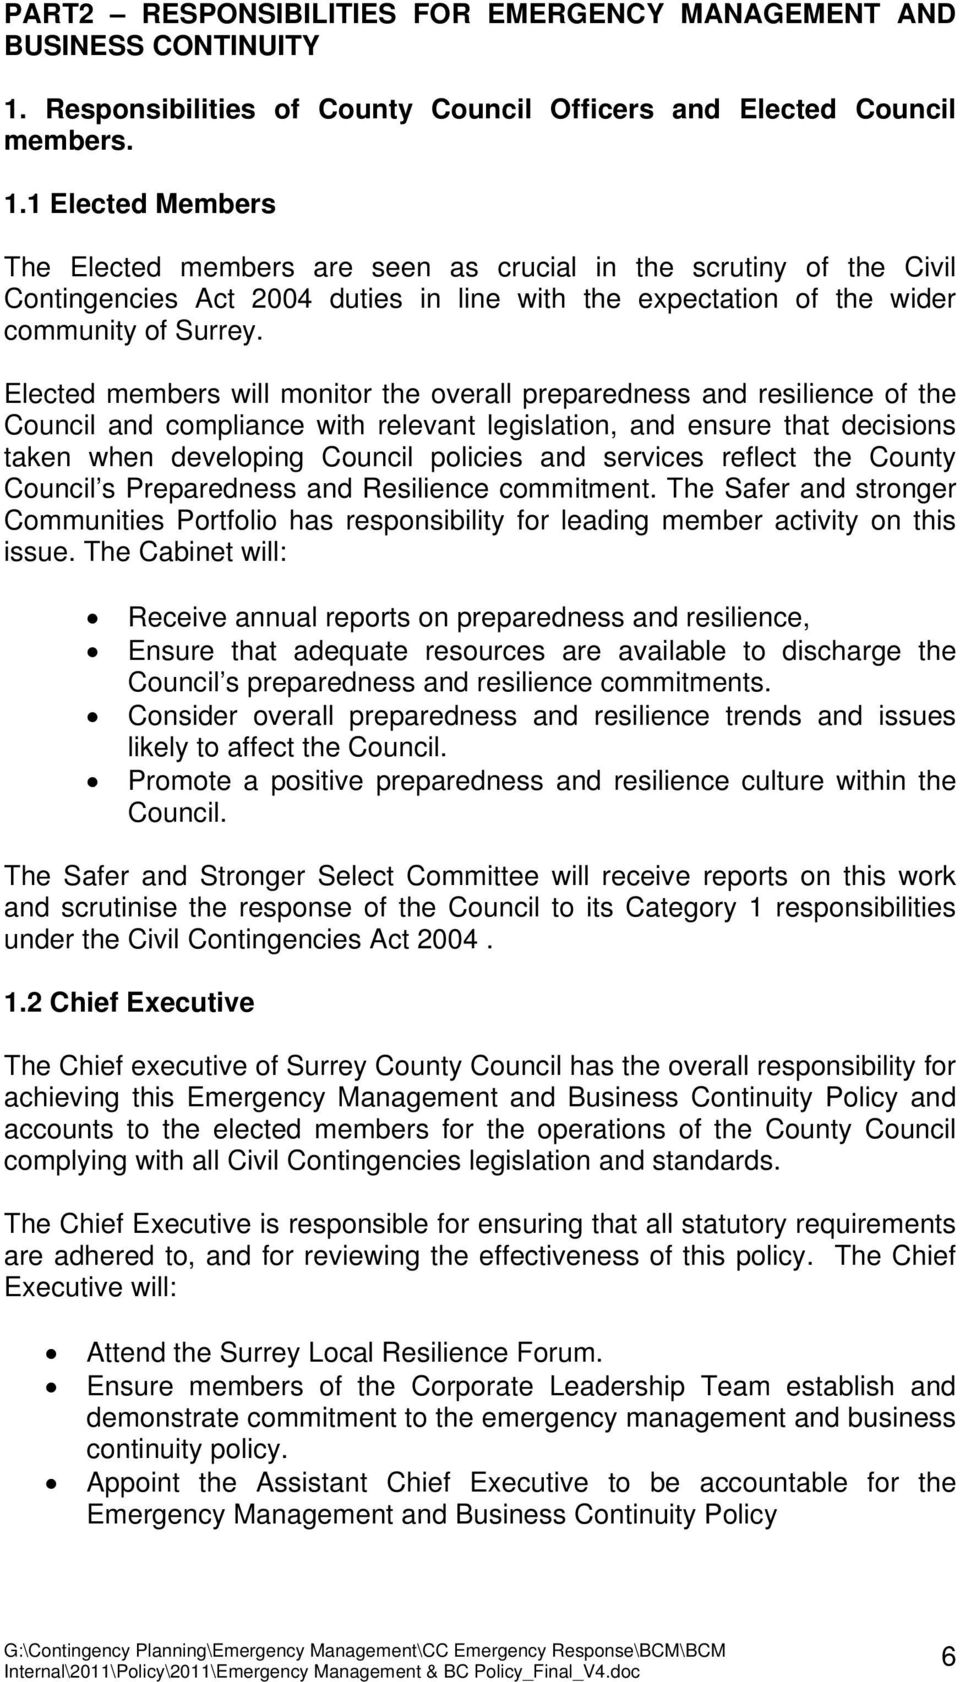 1 Elected Members The Elected members are seen as crucial in the scrutiny of the Civil Contingencies Act 2004 duties in line with the expectation of the wider community of Surrey.